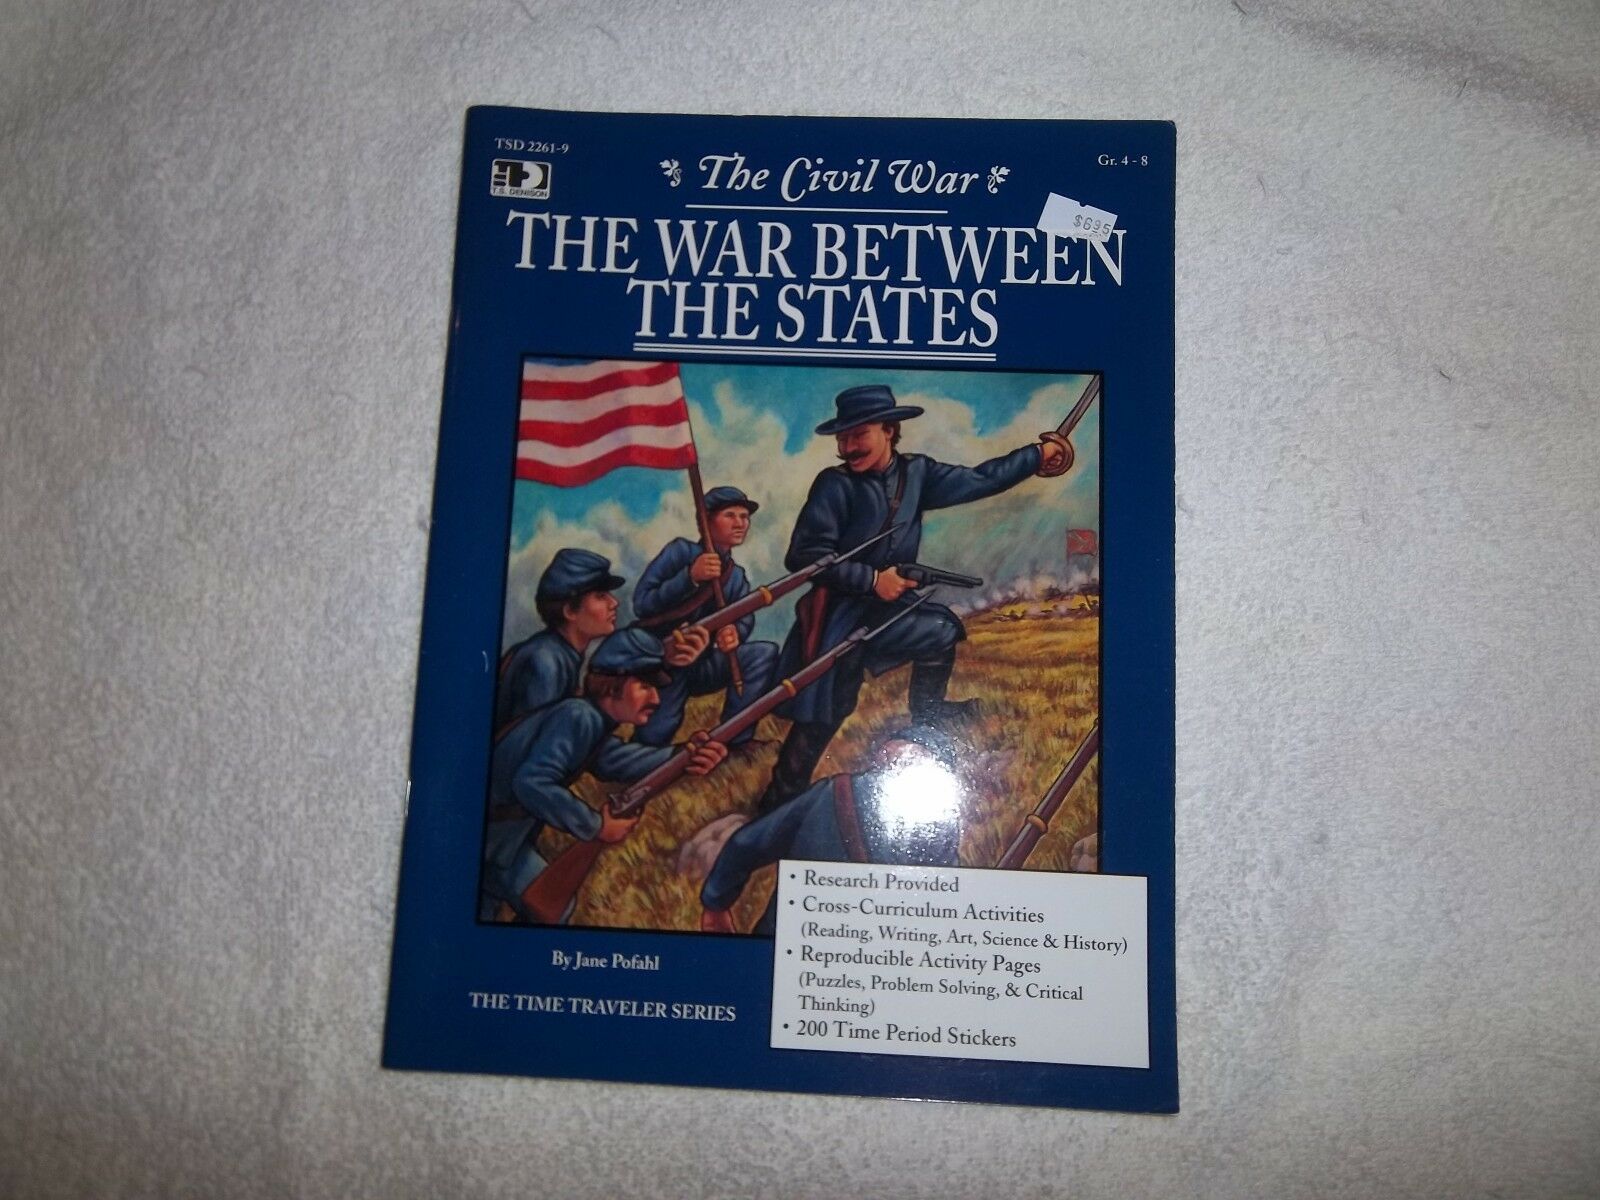 TSD2261-9 THE CIVIL WAR- THE WAR BETWEEN THE STATES (PAPER BACK)